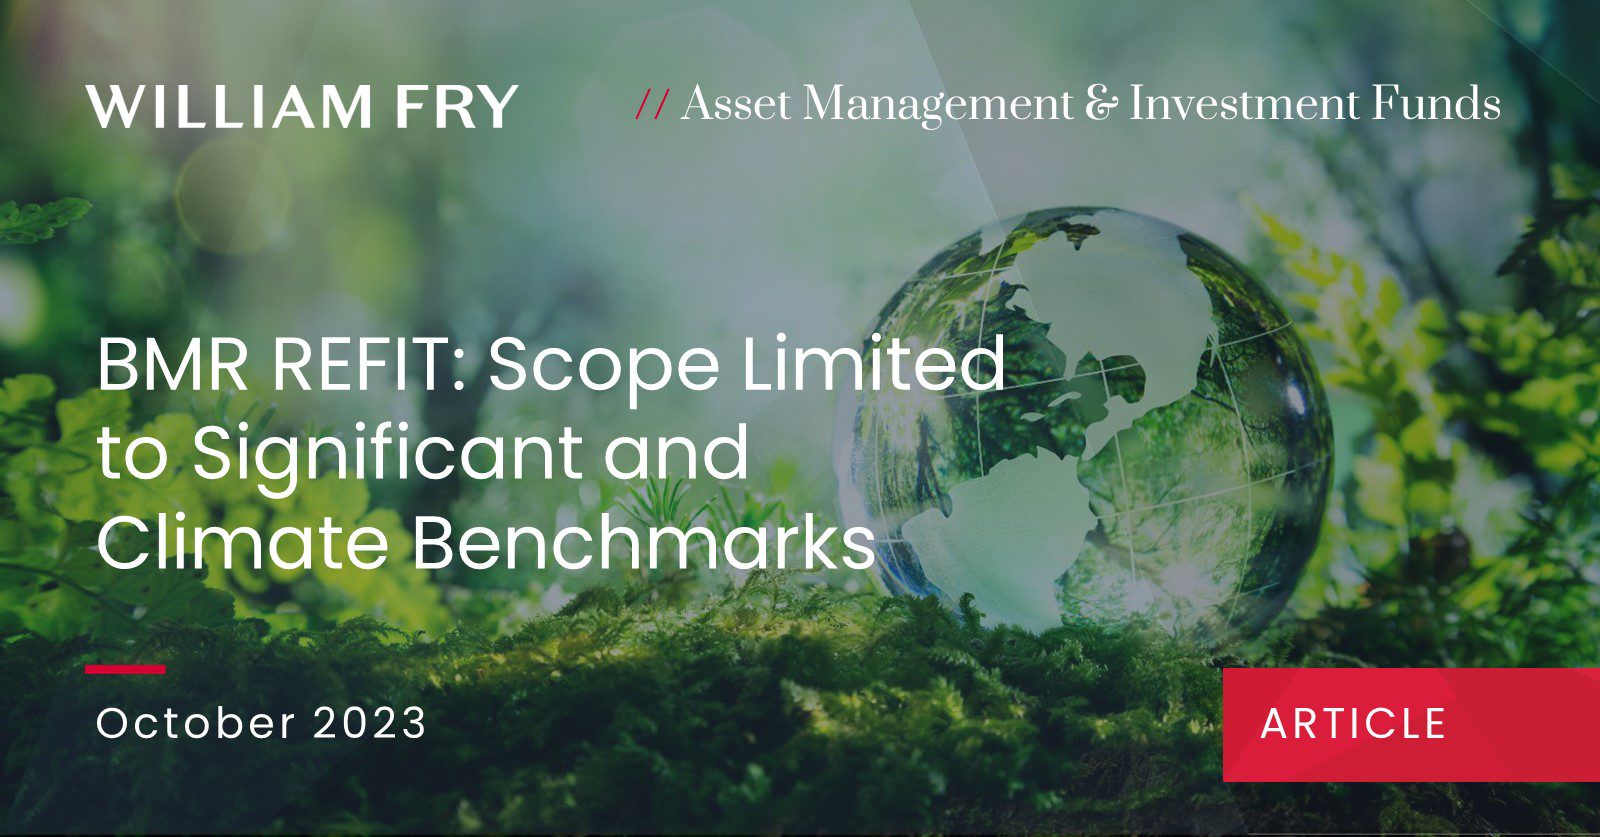 BMR REFIT: Scope Limited to Significant and Climate Benchmarks